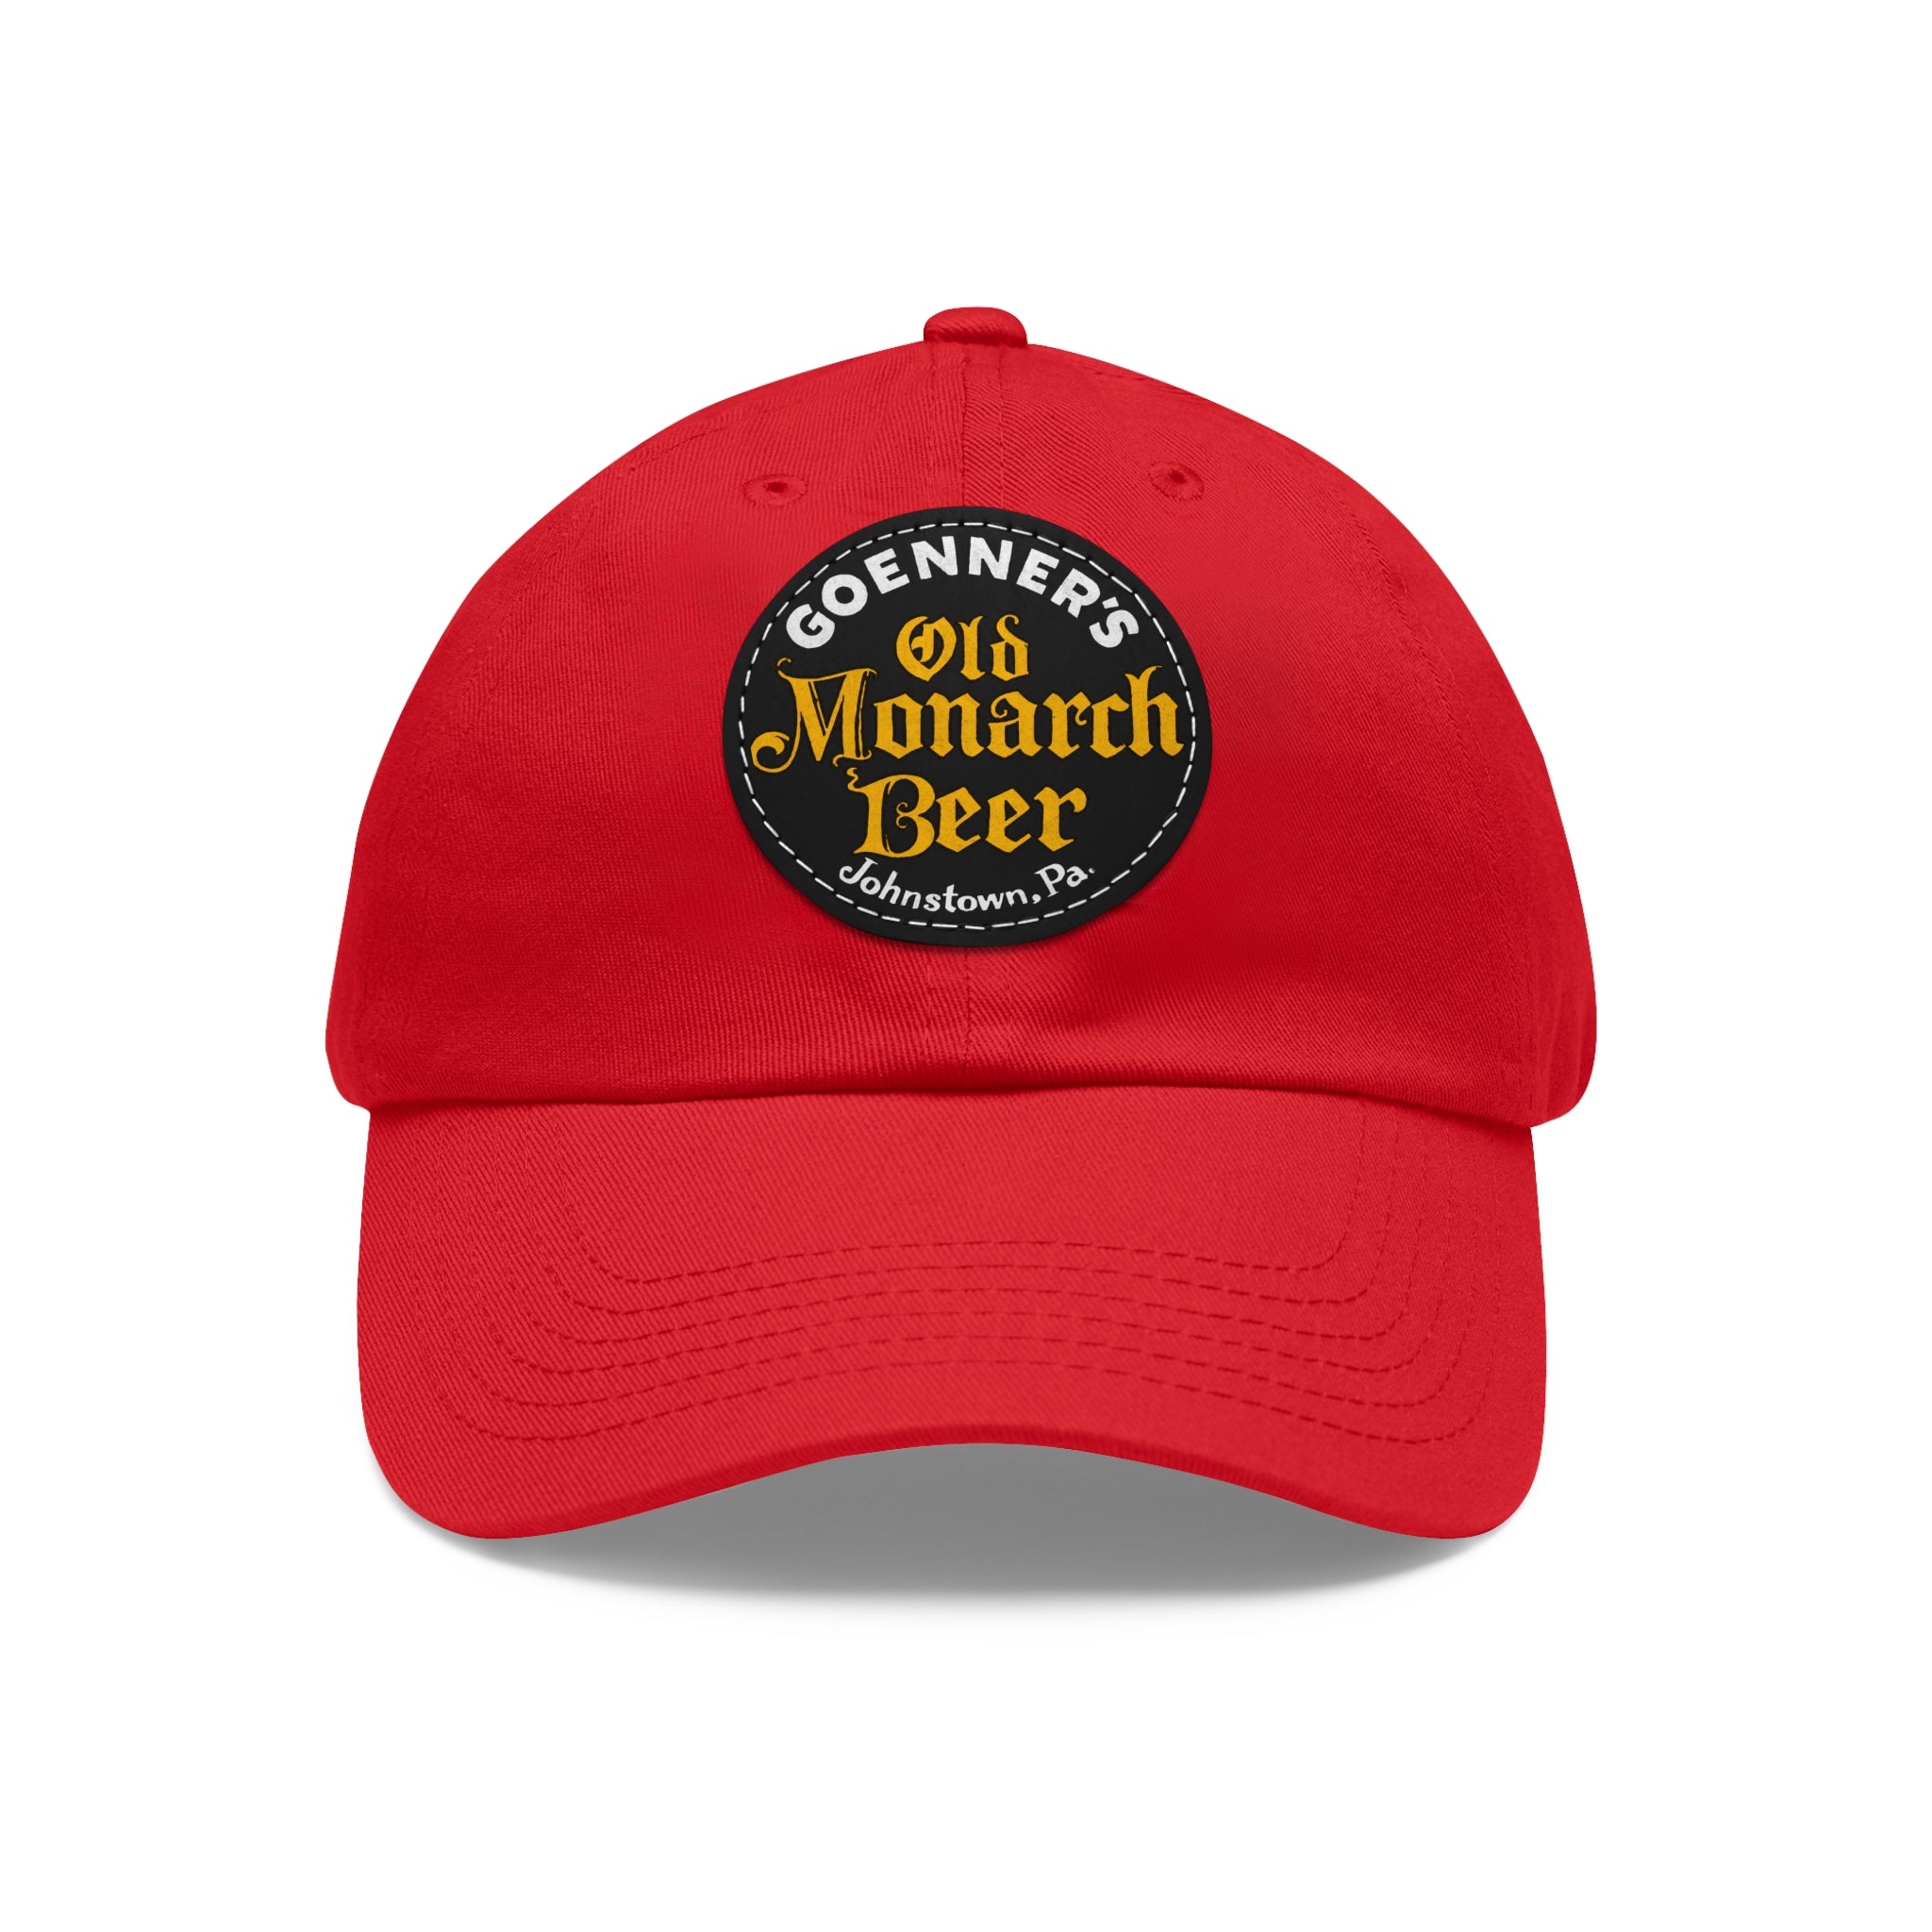 Goenner's Old Monarch Beer - Johnstown,PA - Printed Patch Dad Hat - Yinzylvania